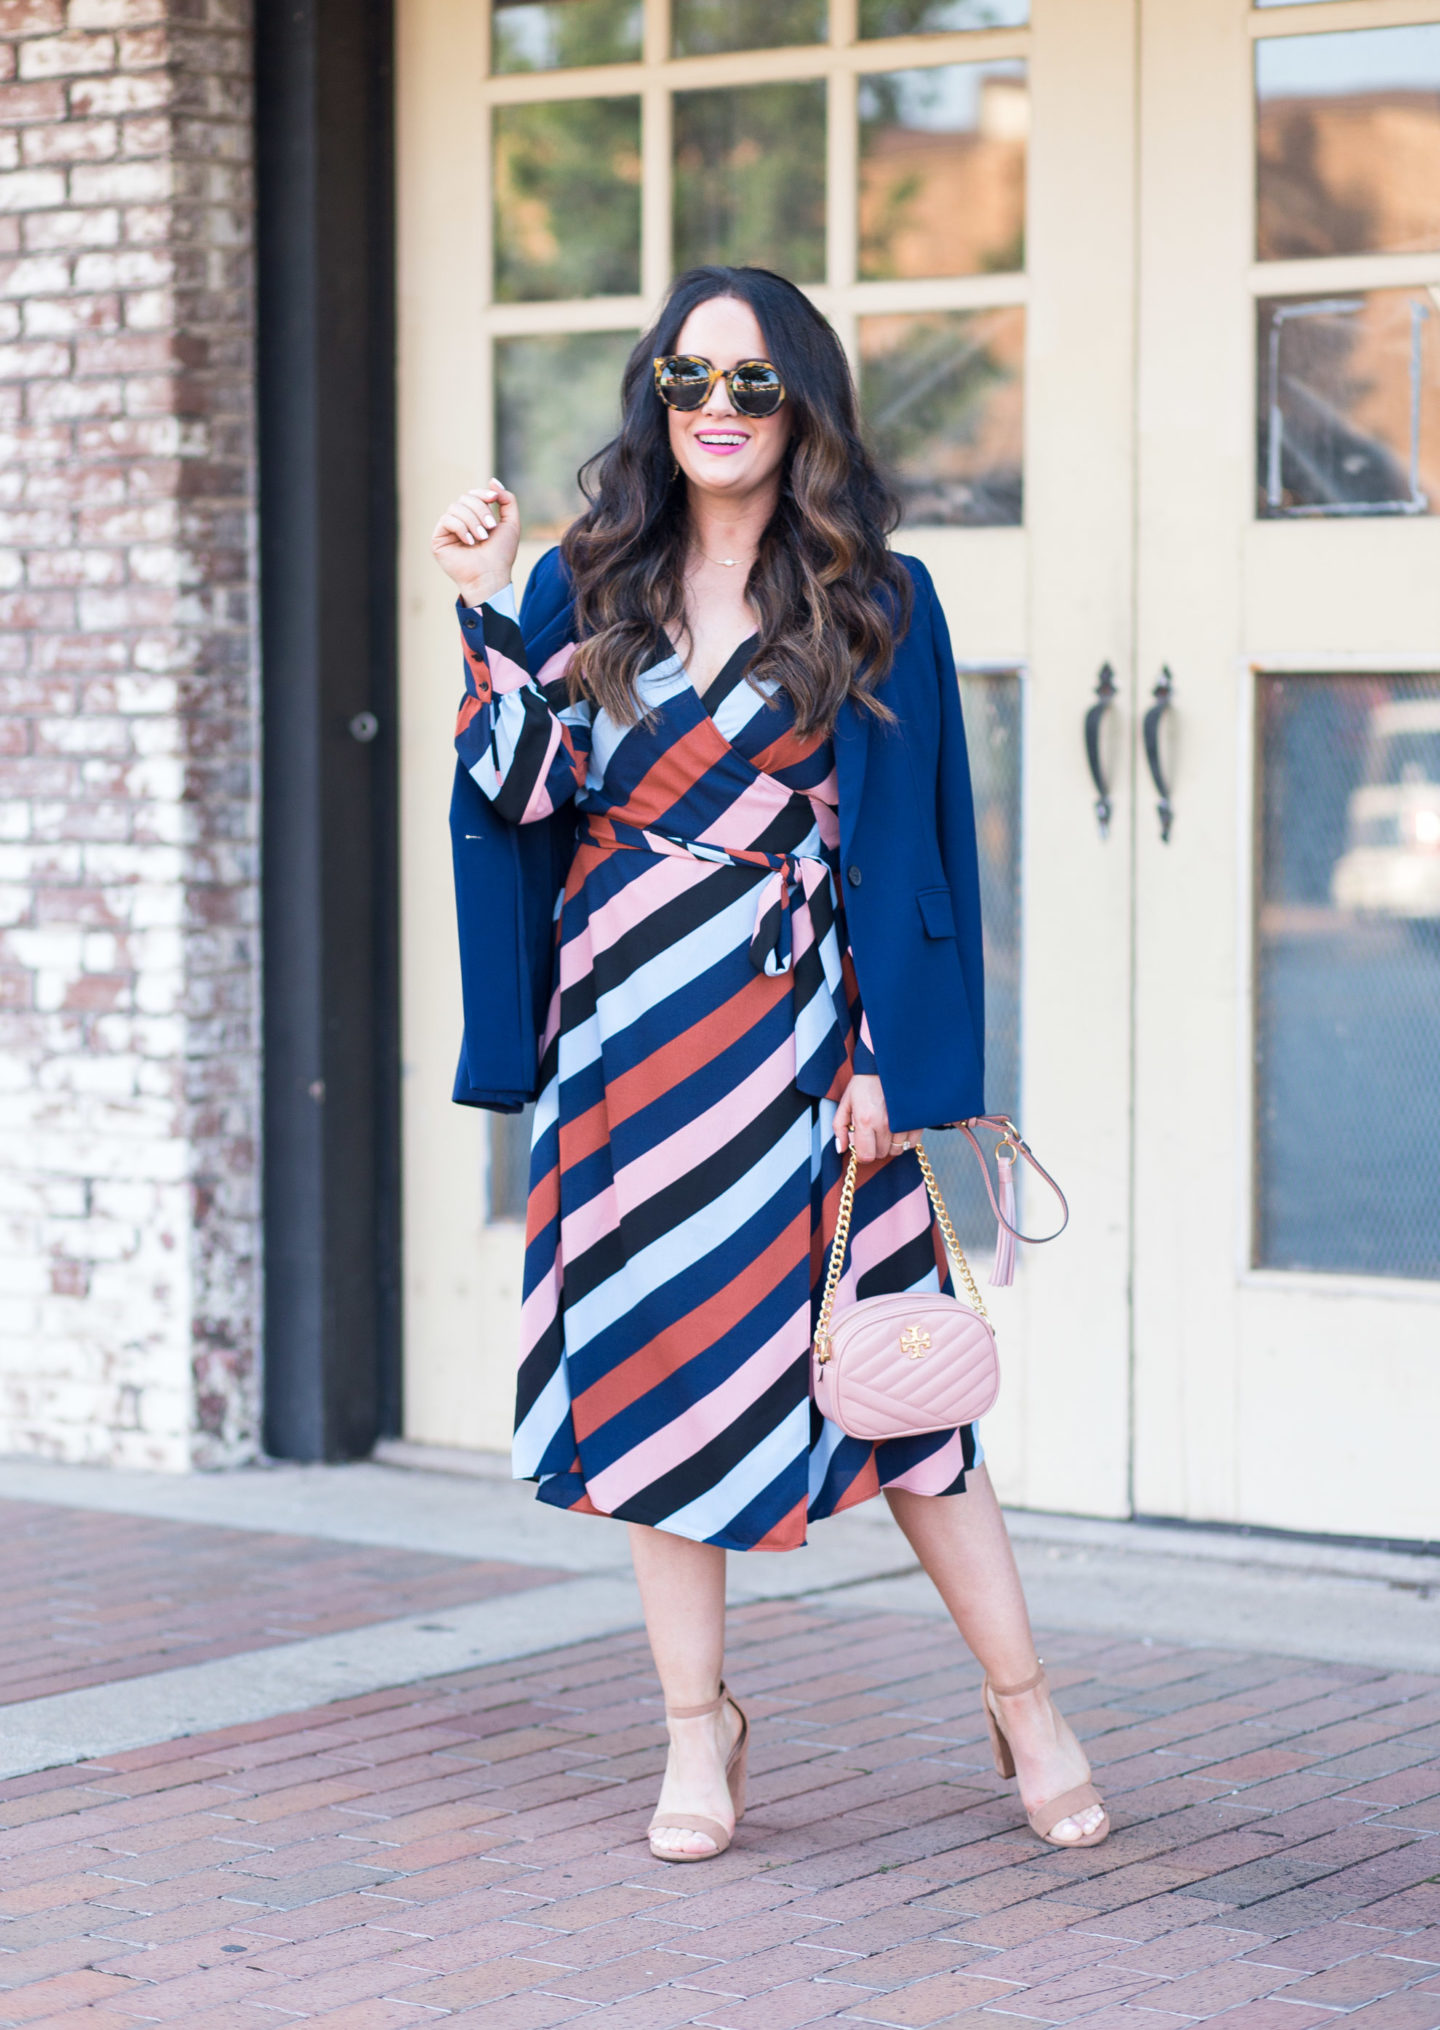 Fall Sister Style Staples: Wrap Dresses + Colorful Blazers - The Double ...